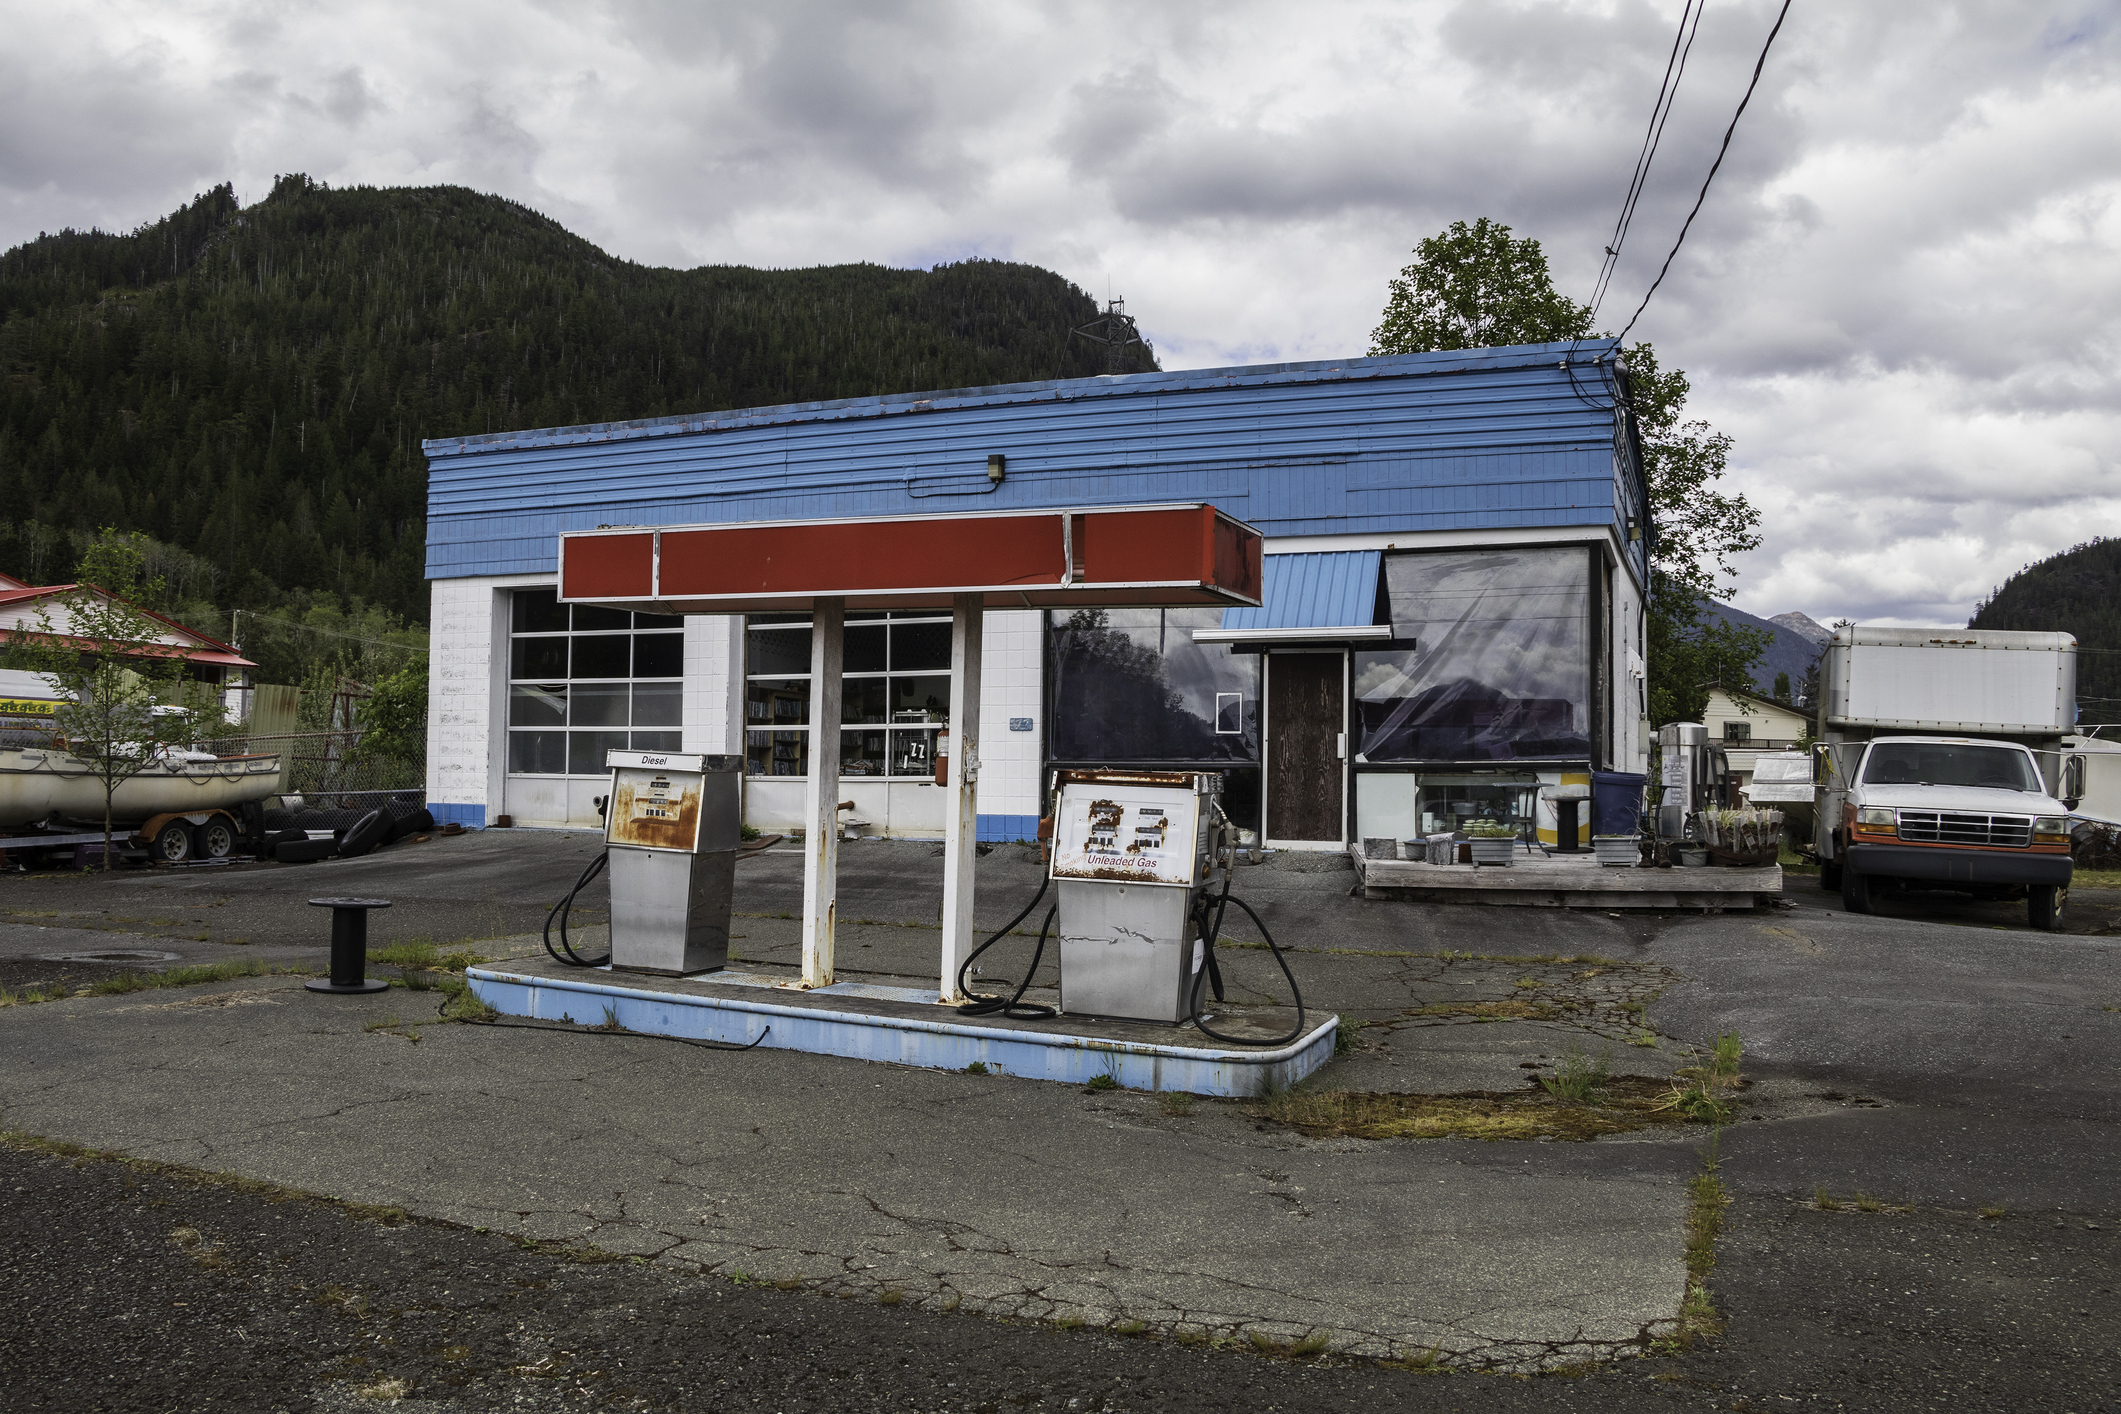 Old gas station with two pumps and a blue building against a mountainous backdrop